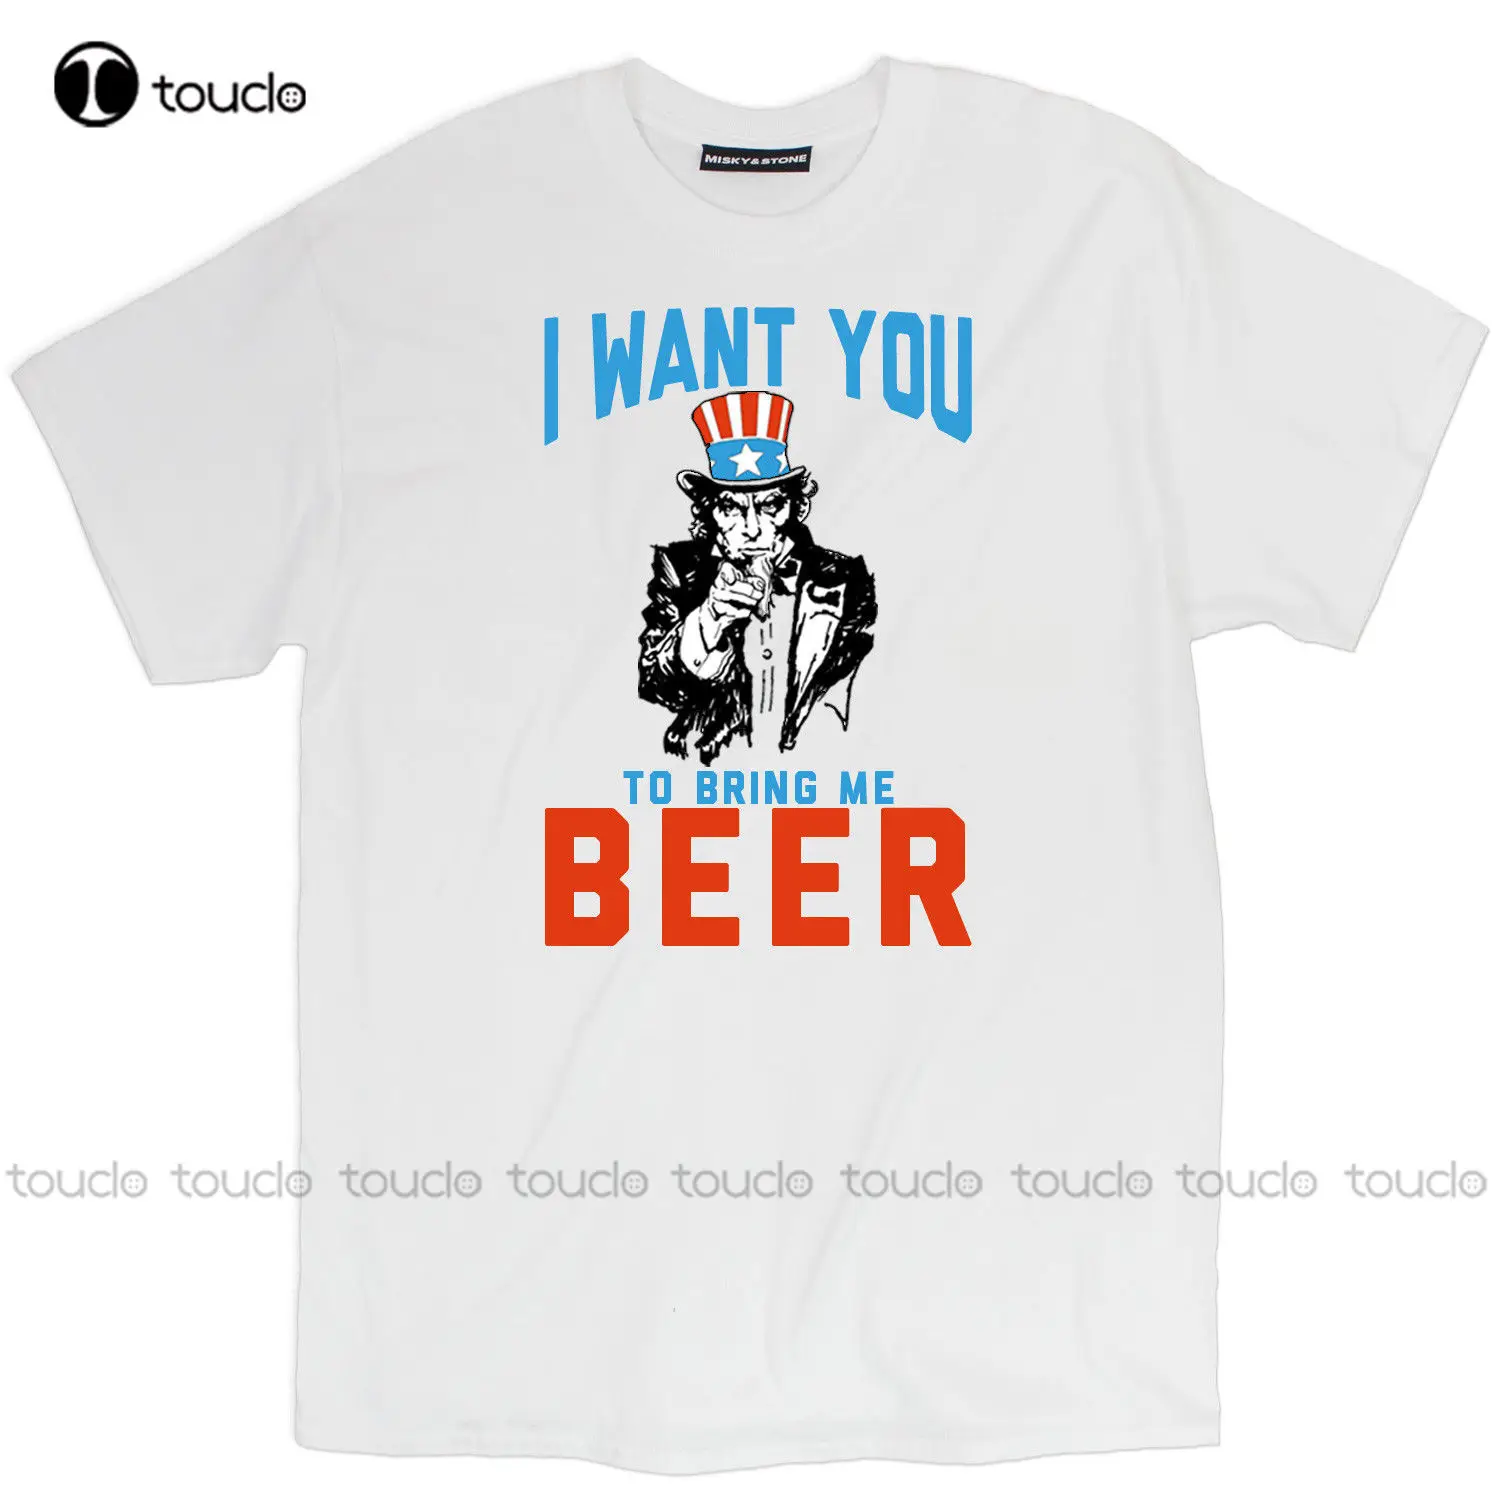 

Fashion T-Shirt Men Clothing I Want You To Bring Me Beer Funny Uncle Sam 4th of July Shirts Print T Shirt Hot fashion funny new